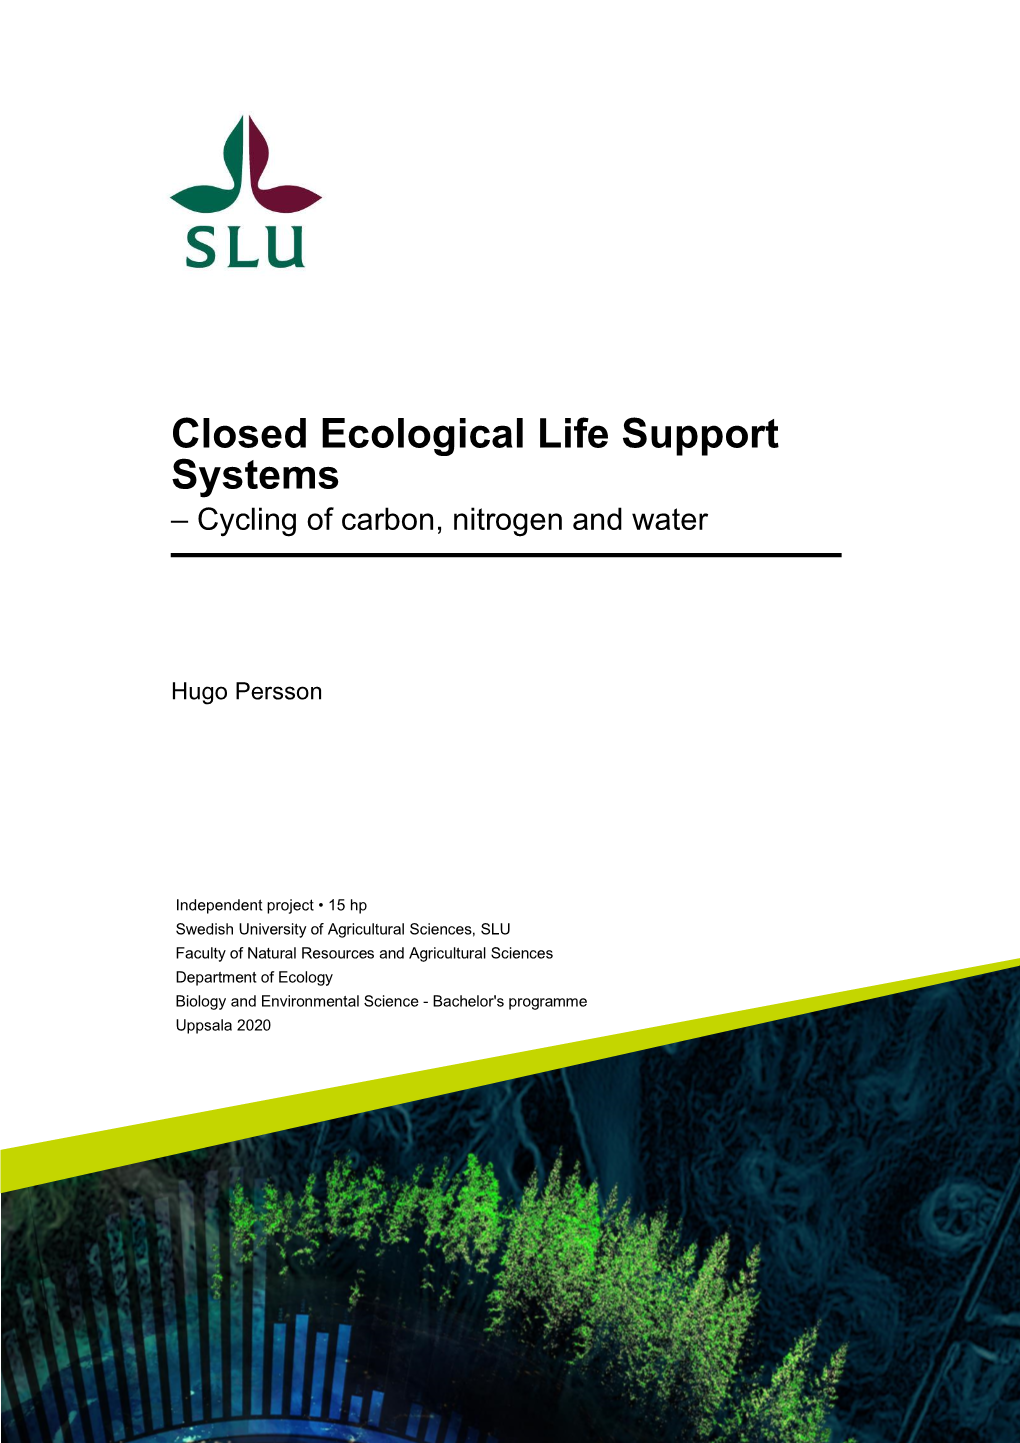 Closed Ecological Life Support Systems – Cycling of Carbon, Nitrogen and Water